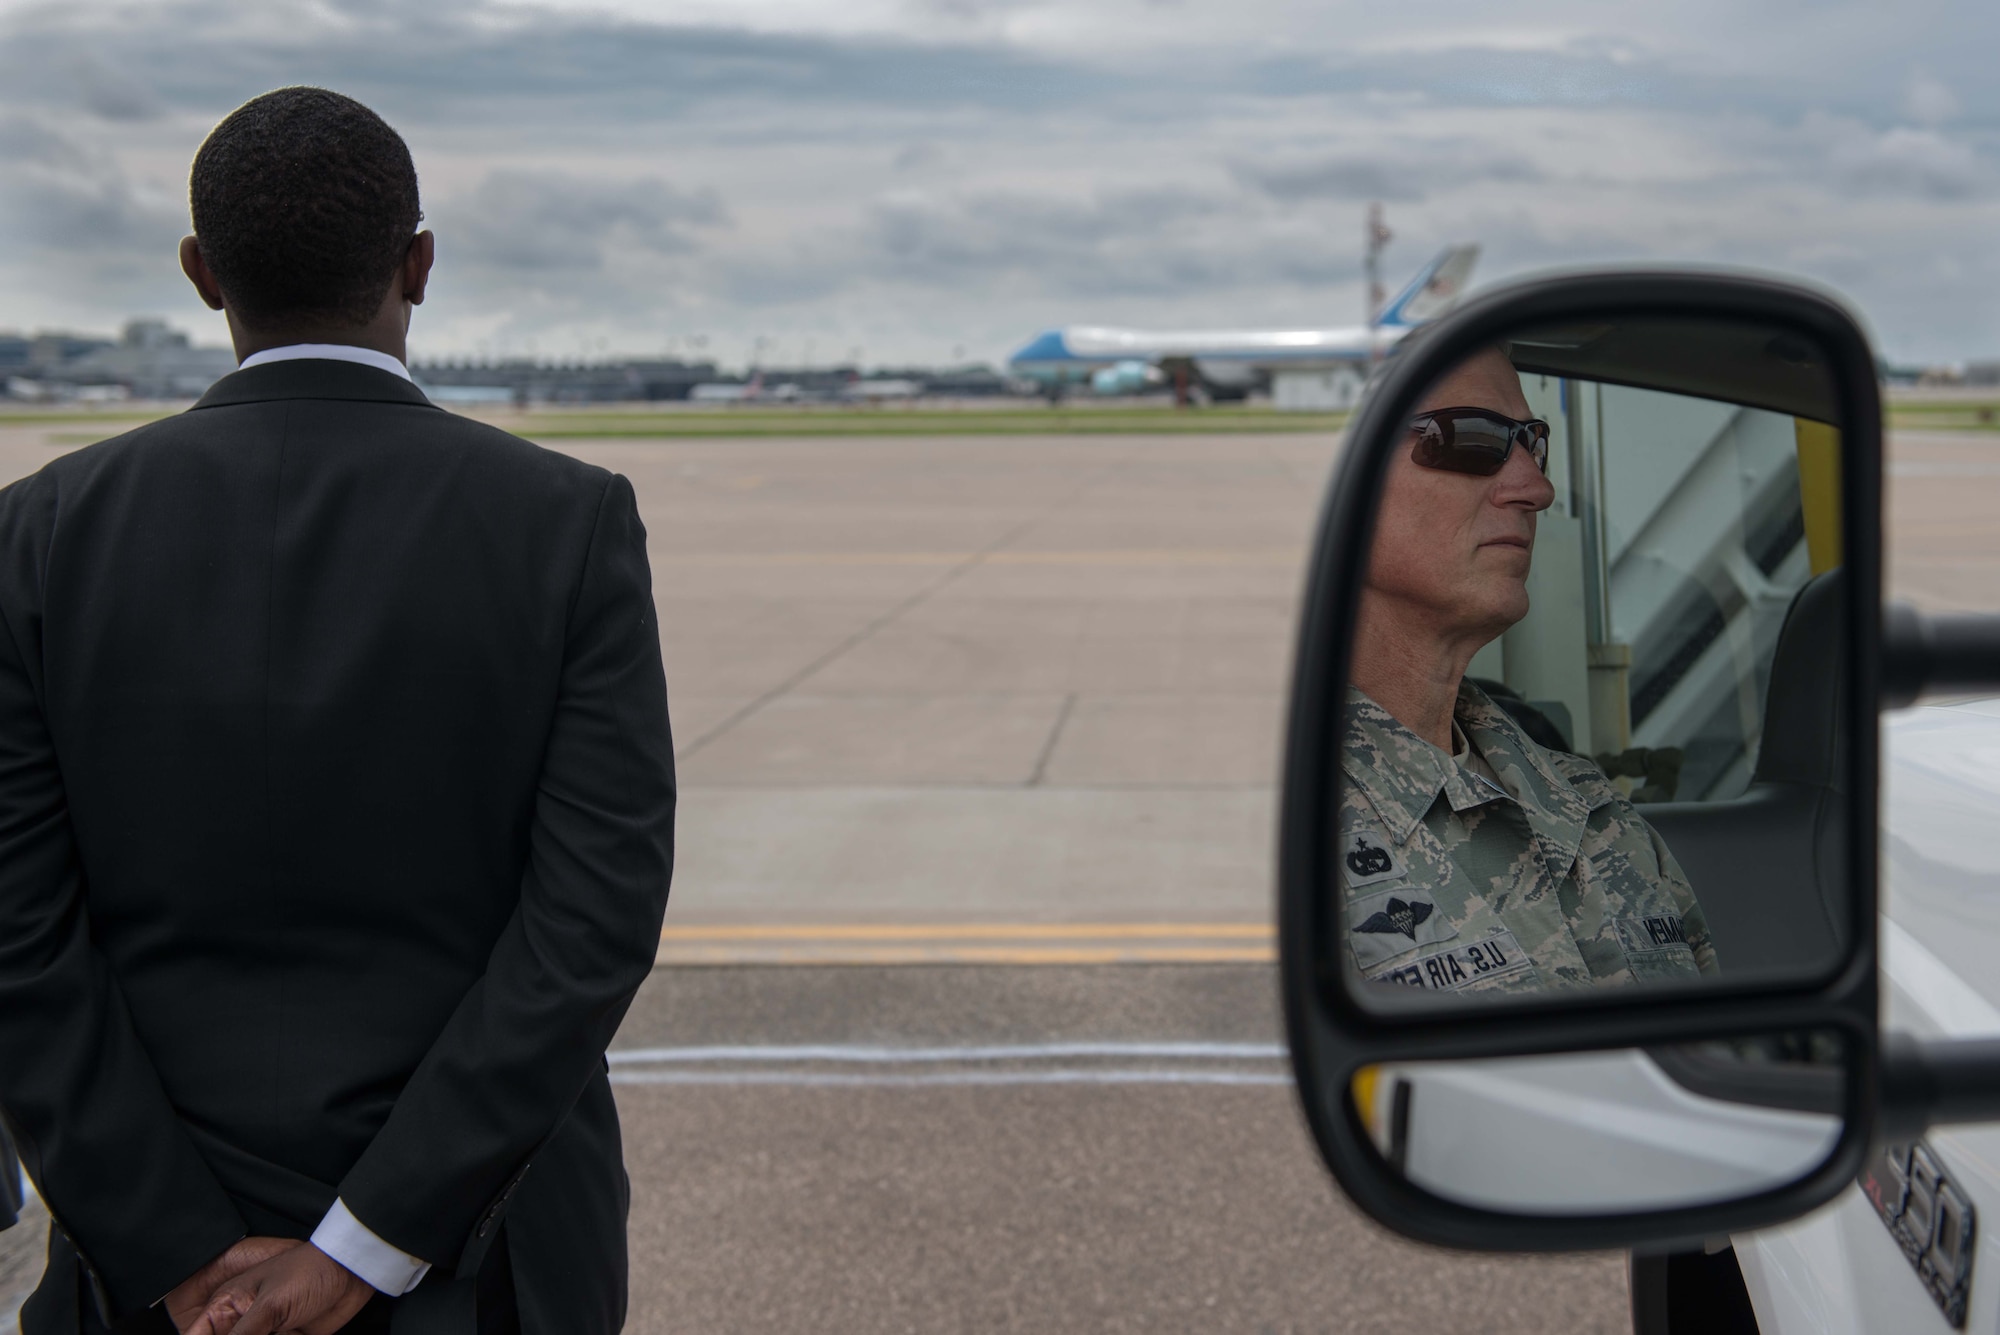 Tech. Sgt. Scott R. Tammen, 27th Aerial Port Squadron, waits with the mobile staircase as Air Force One taxis in to the 934th Airlift Wing at Minneapolis St. Paul International Airport Air Reserve Station. (Air Force Photo/Staff Sgt. Trevor Saylor)